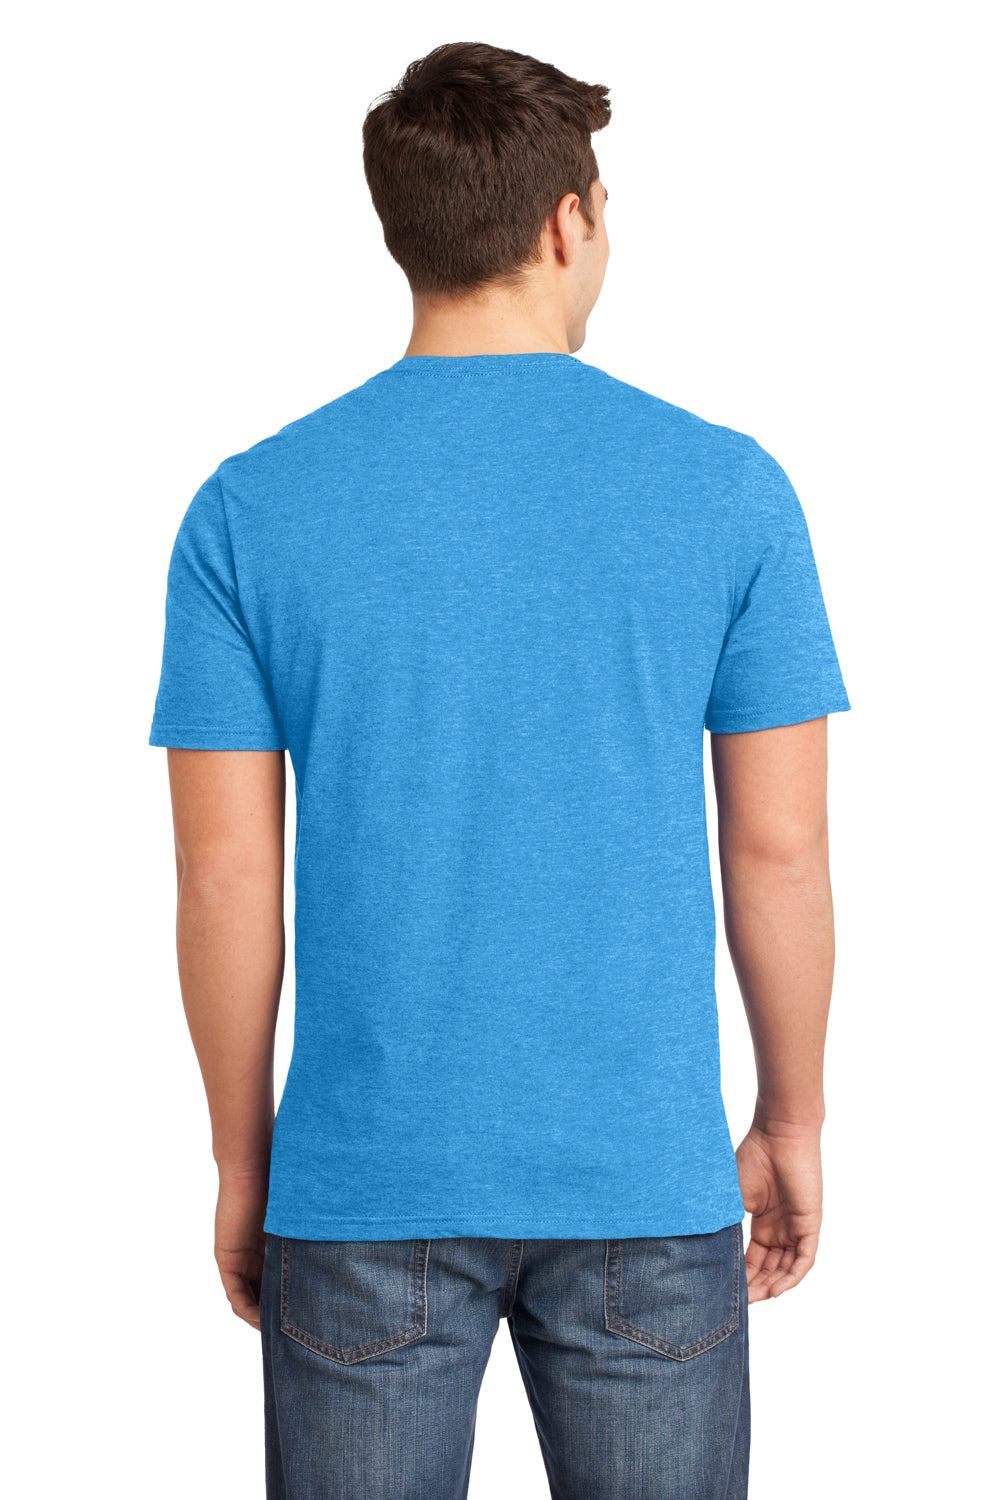 District DT6000 Mens Very Important Short Sleeve Crewneck T-Shirt Heather Turquoise Blue Back